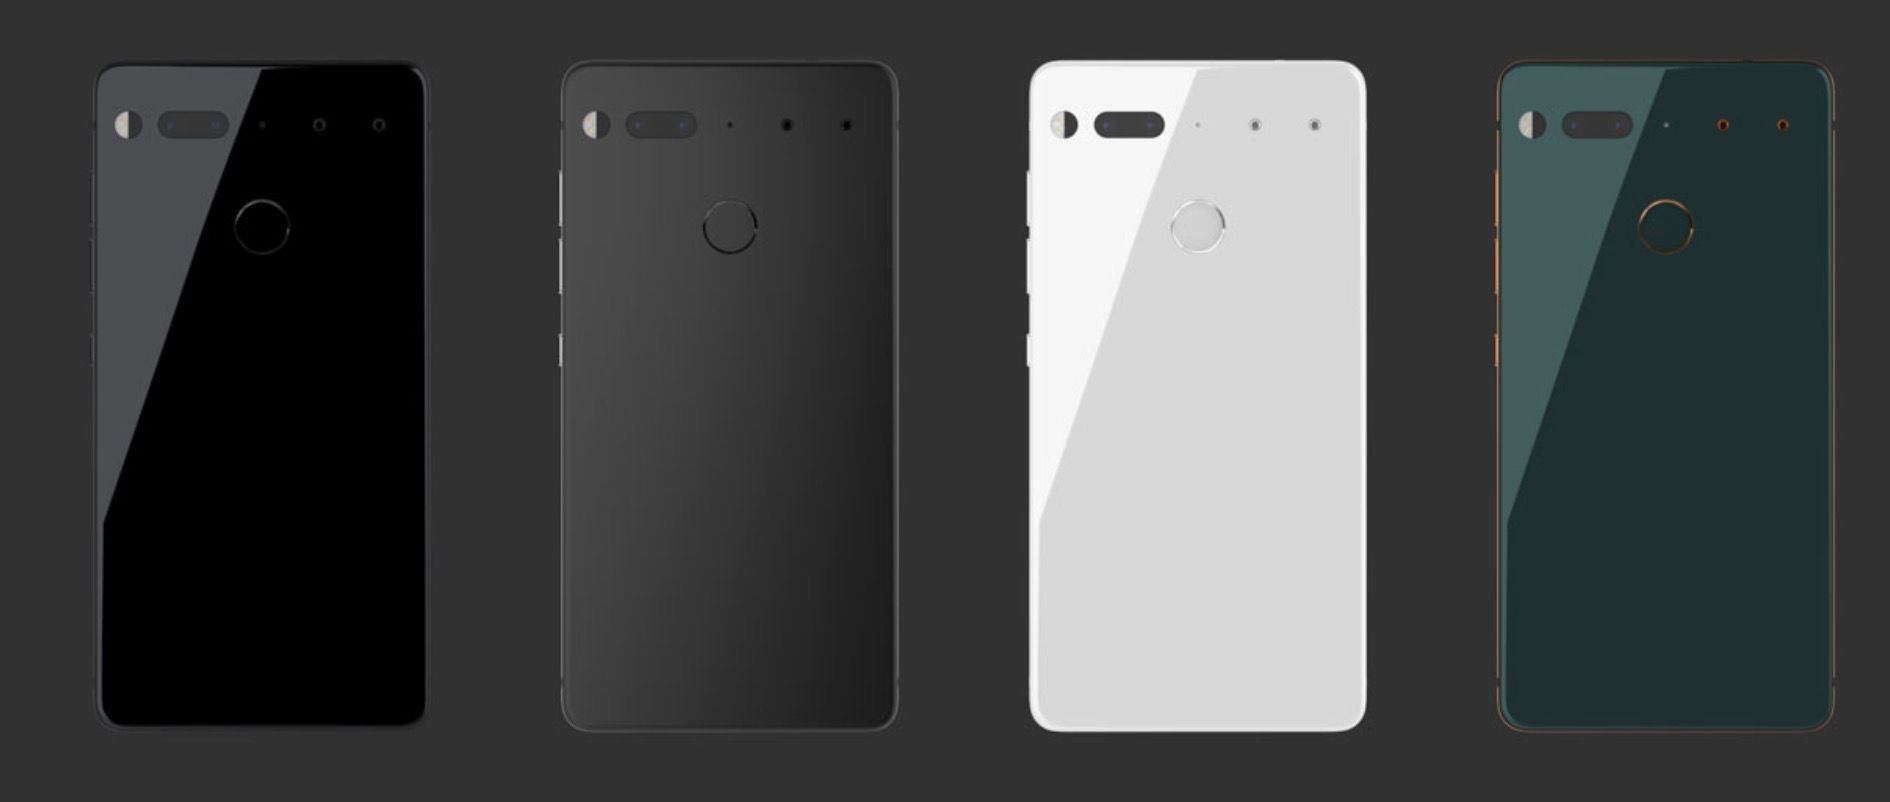 essential phone price release date and everything you need to know image 5